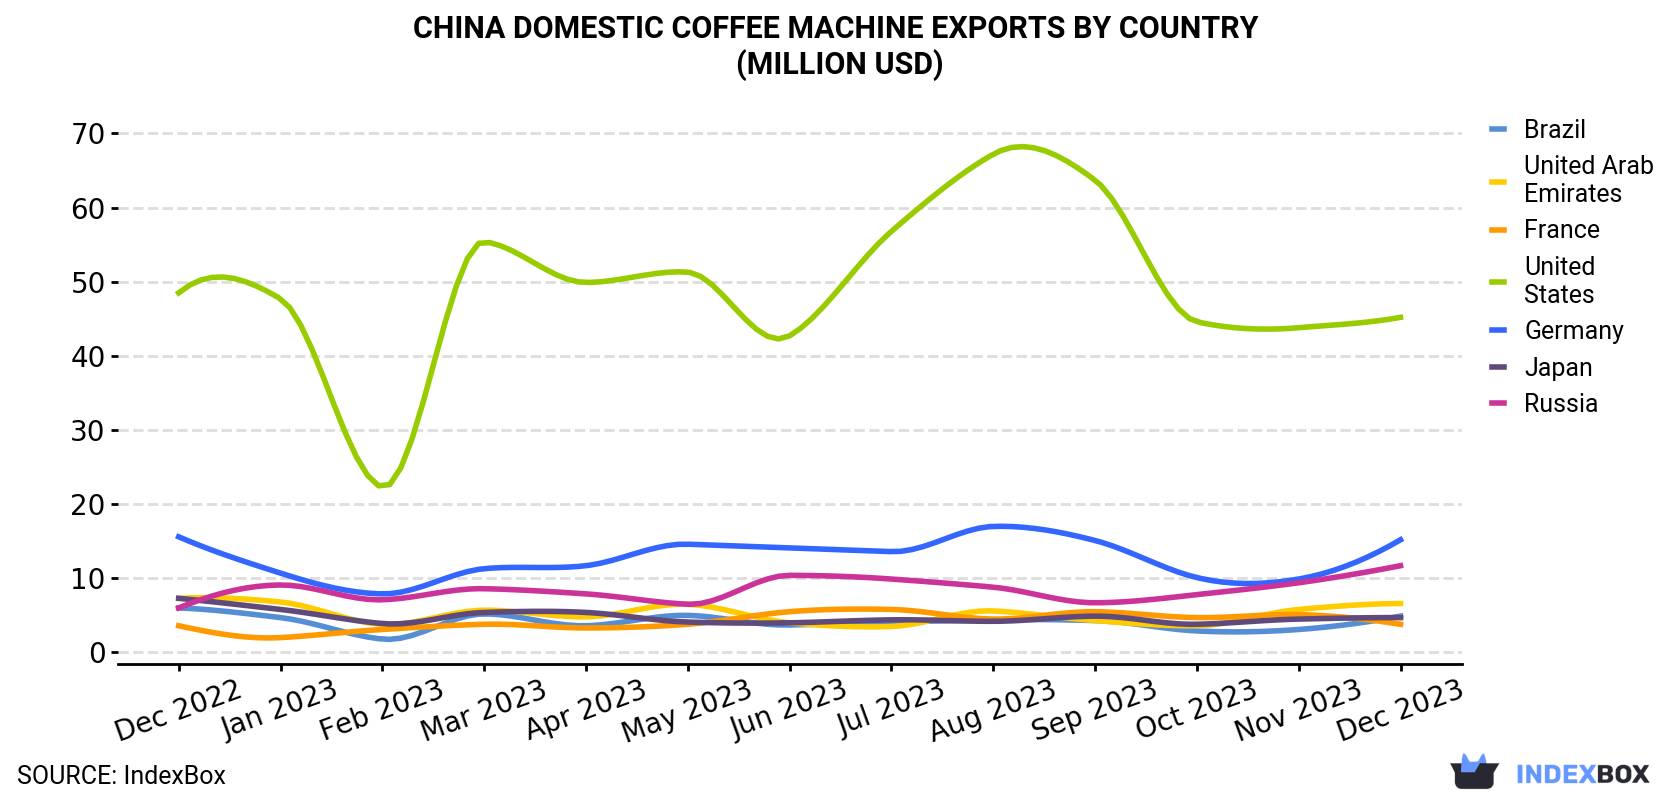 China Domestic Coffee Machine Exports By Country (Million USD)